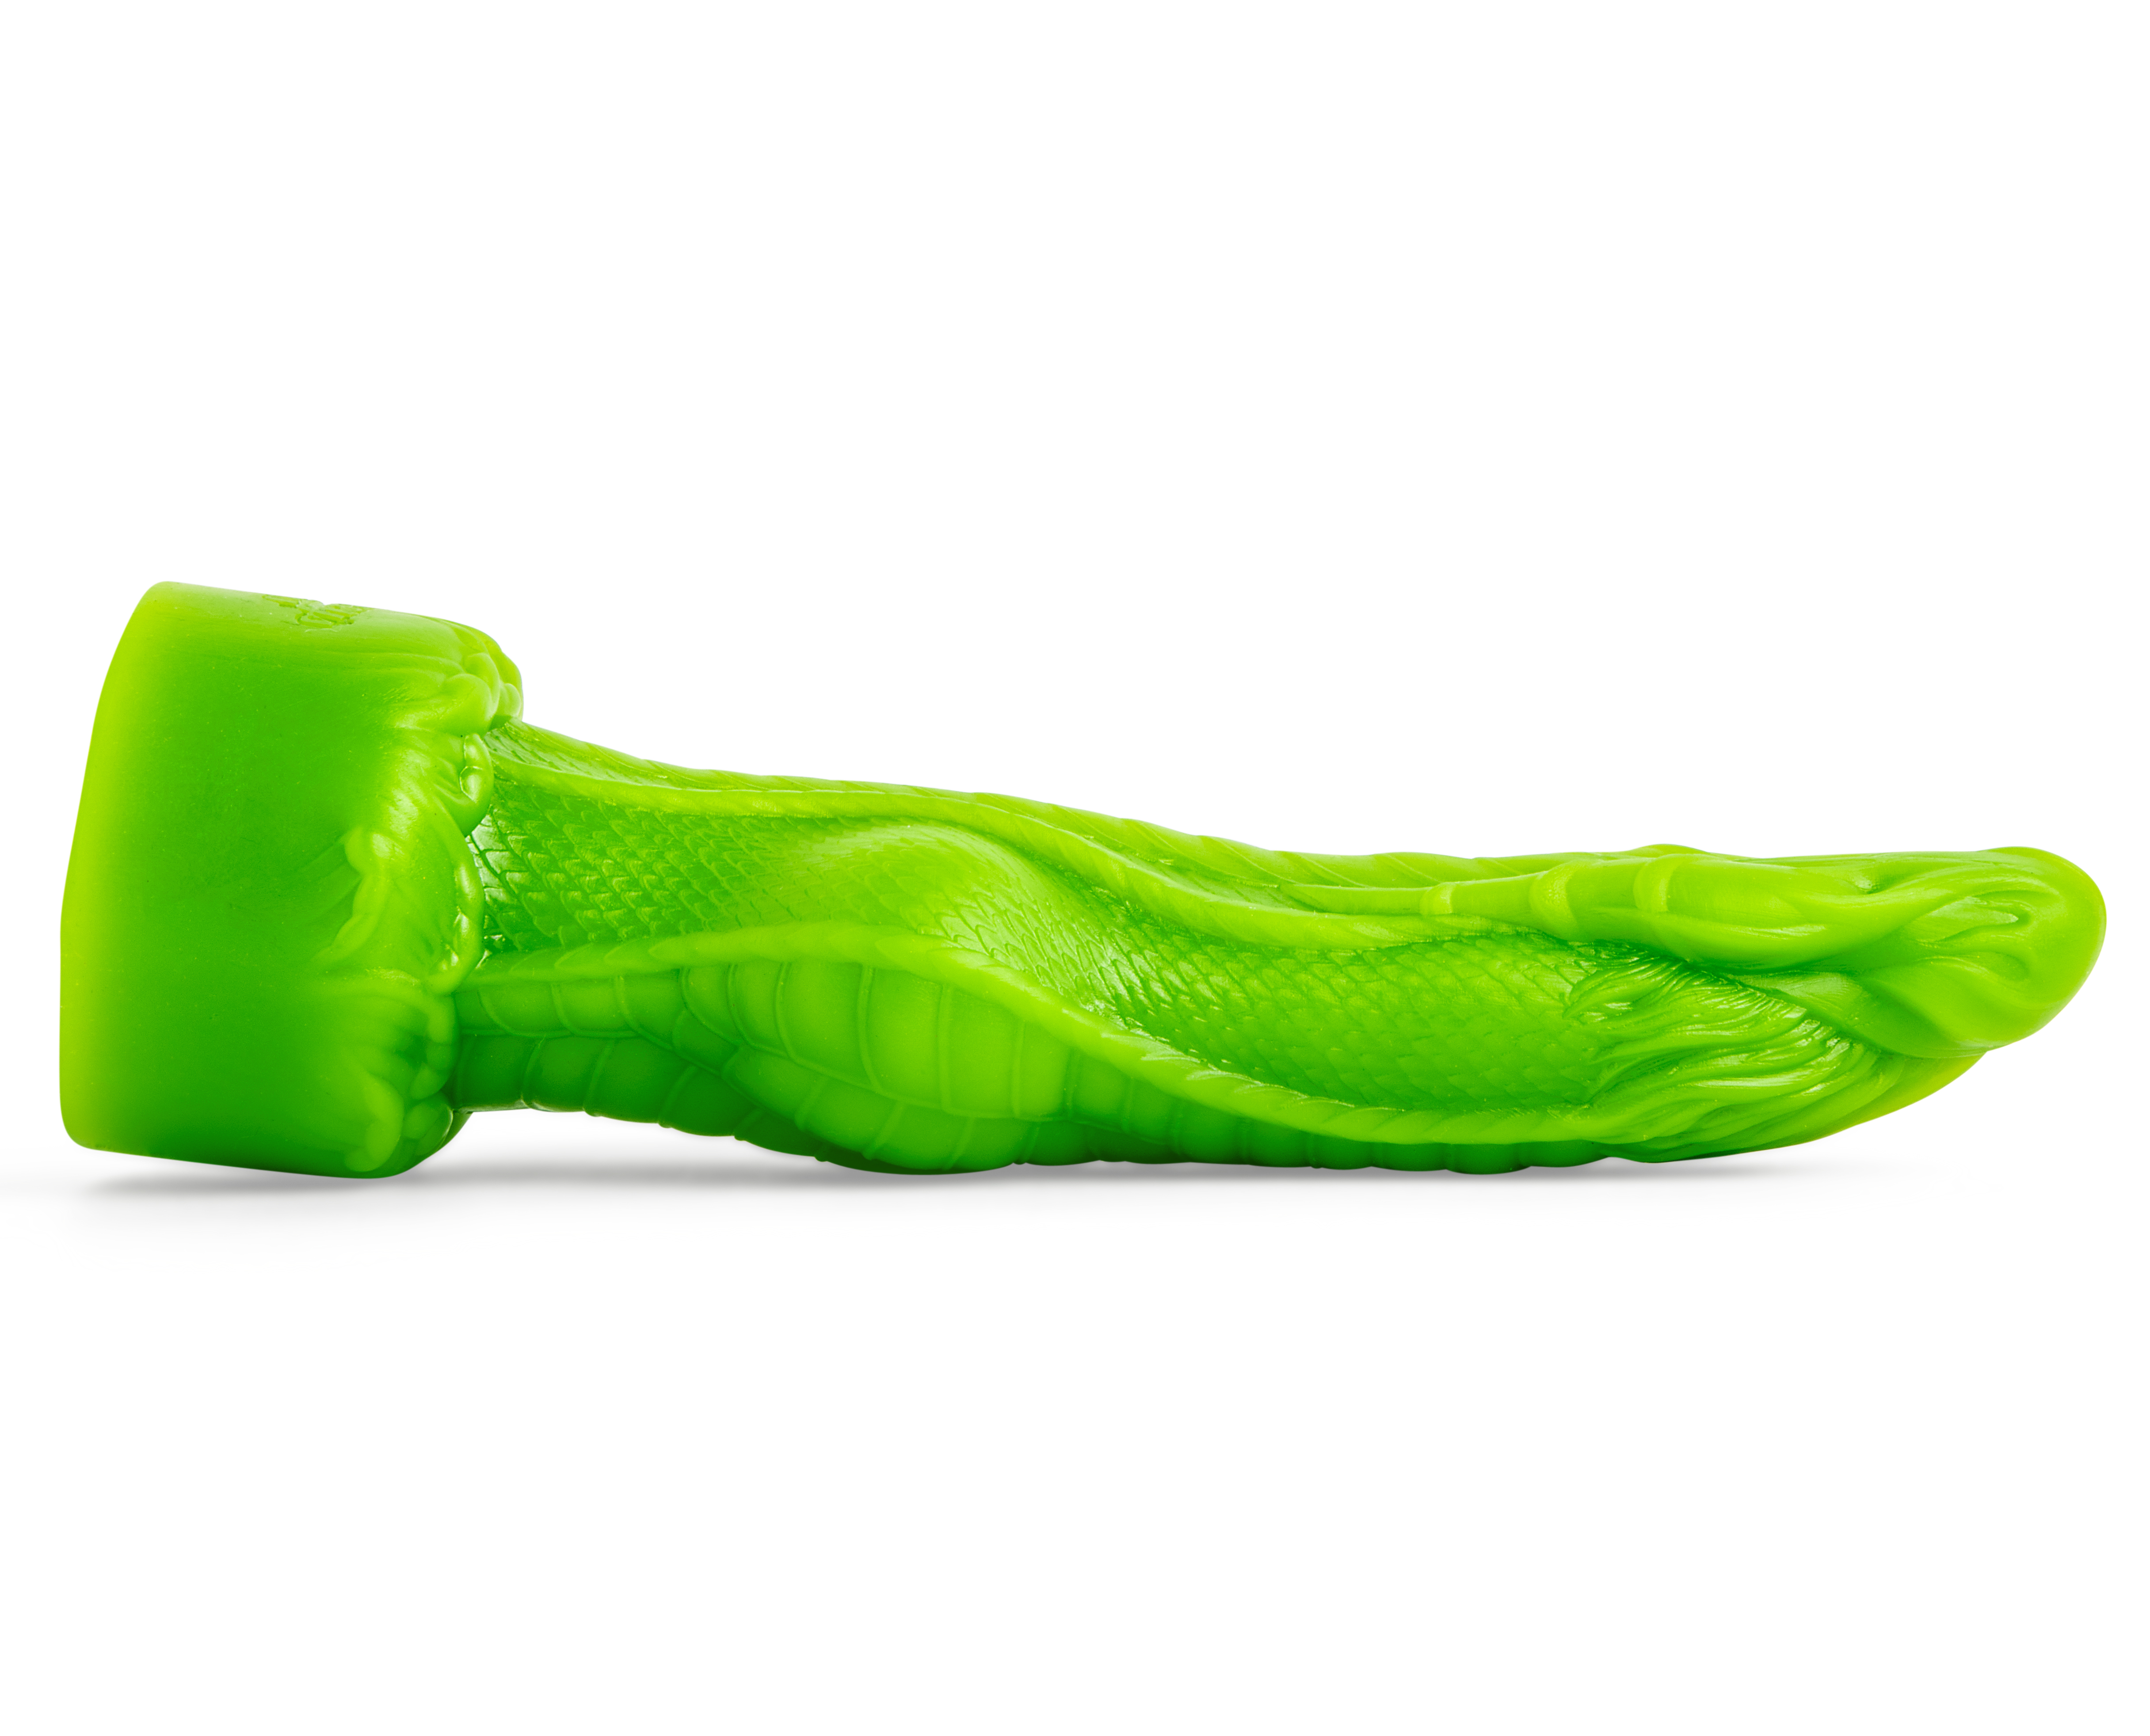 Green dragon-themed adult toy